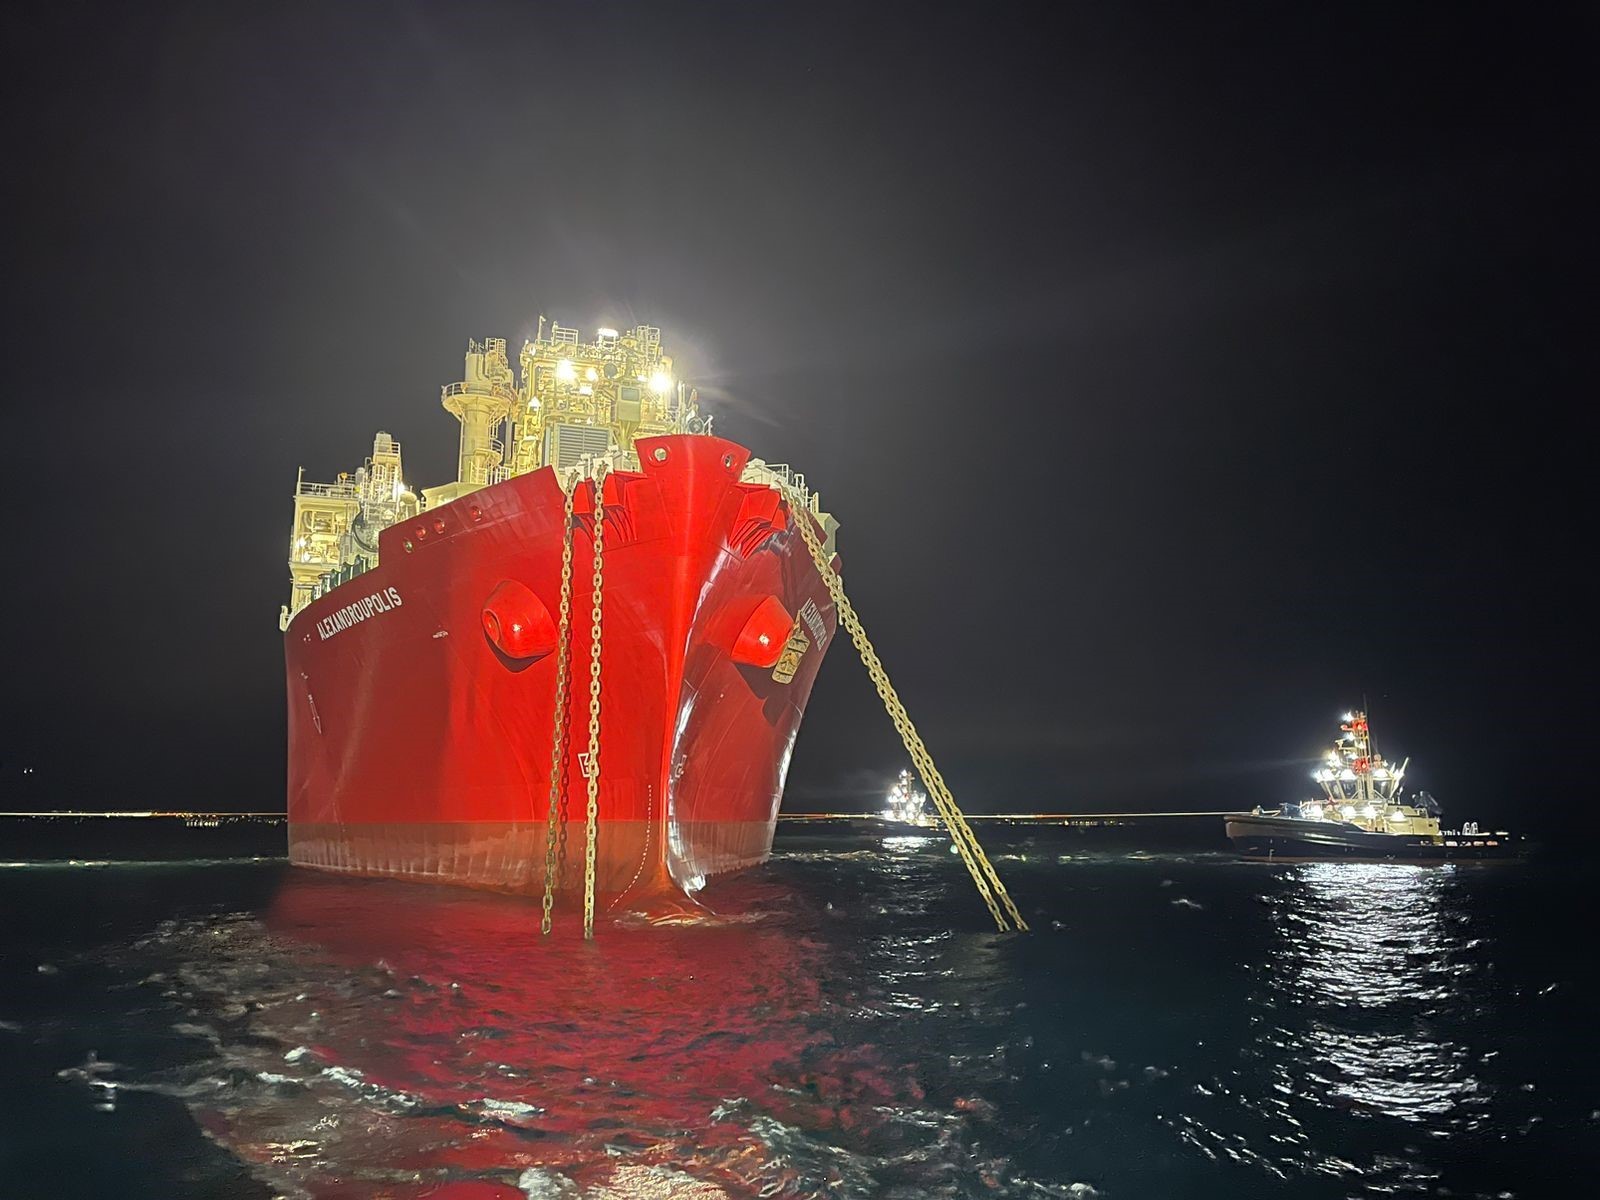 Gastrade: Greece's first FSRU to receive commissioning LNG cargo on January 20